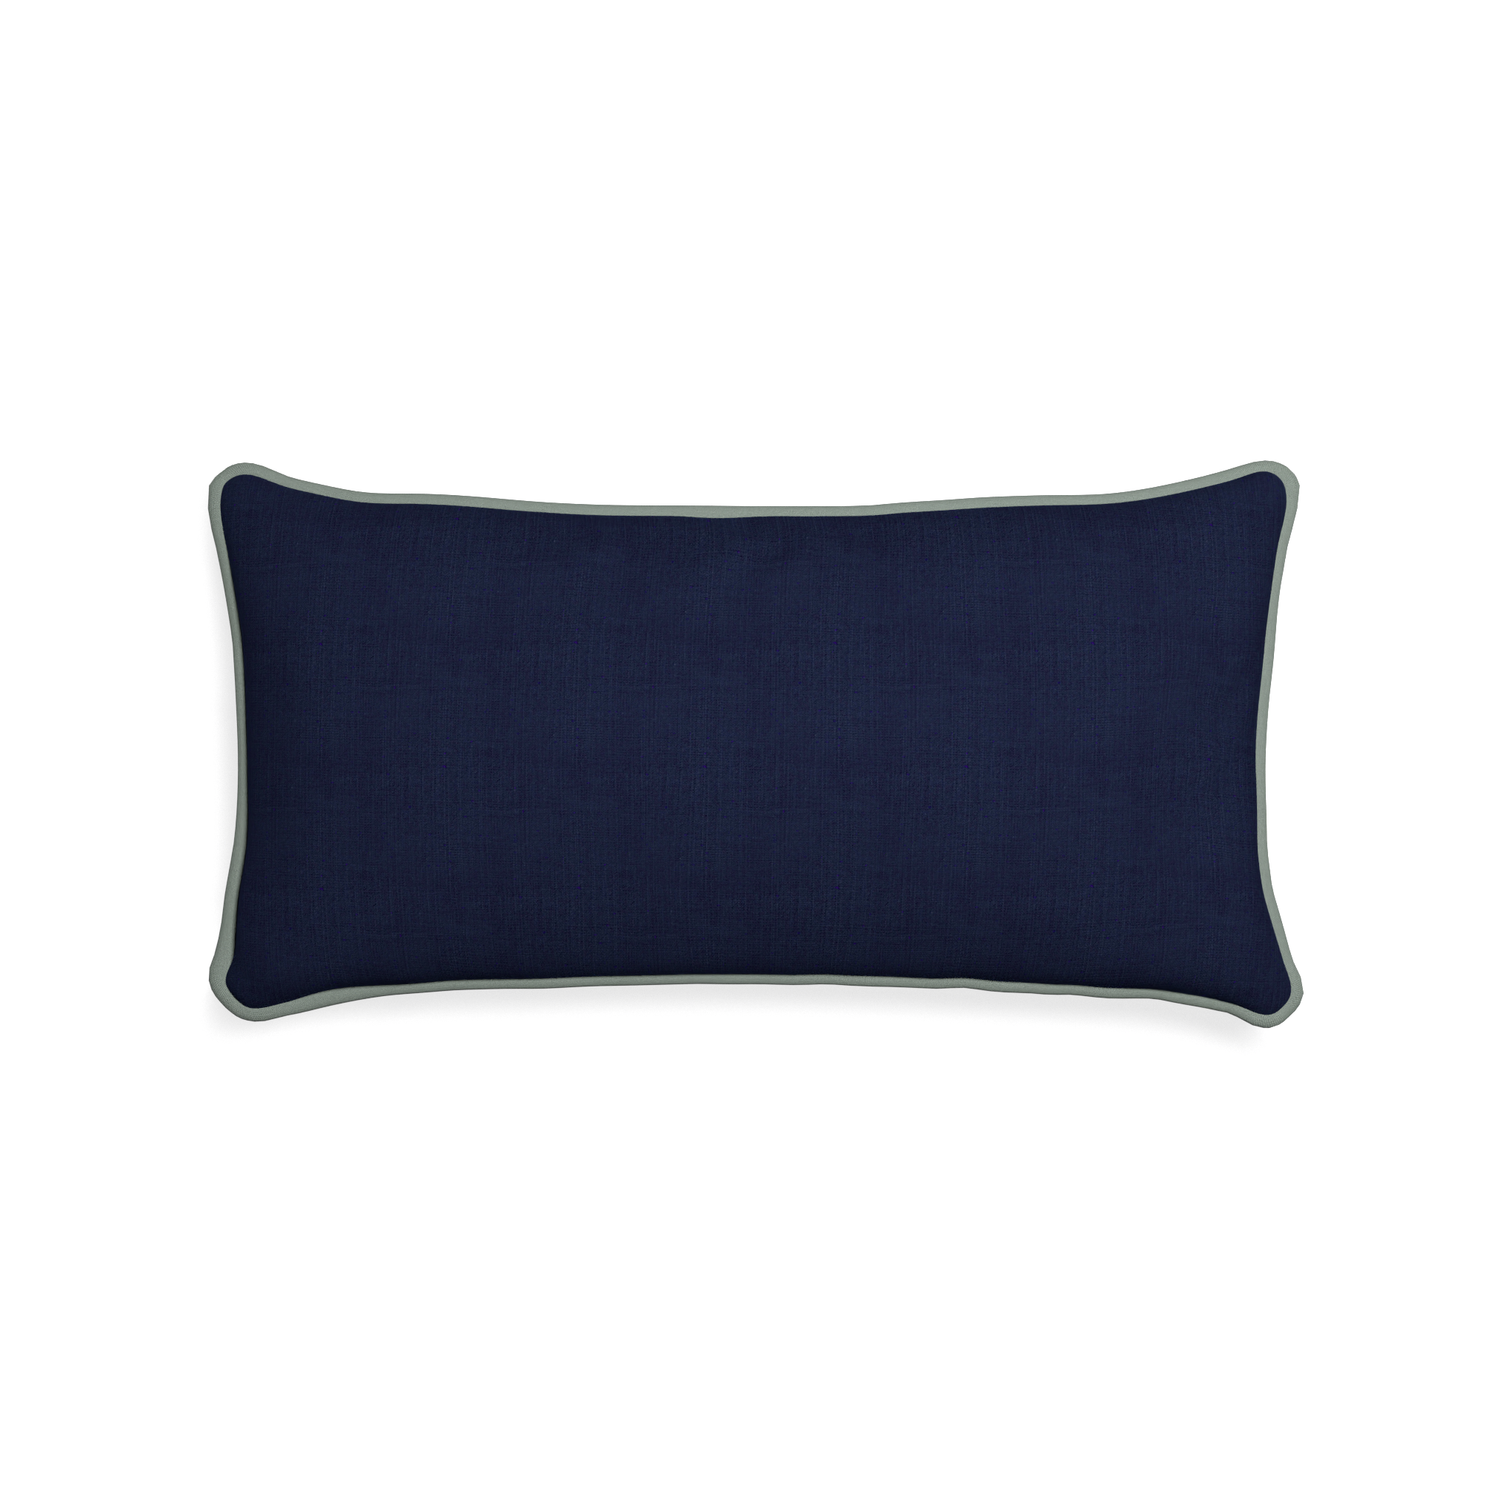 Midi-lumbar midnight custom navy bluepillow with sage piping on white background